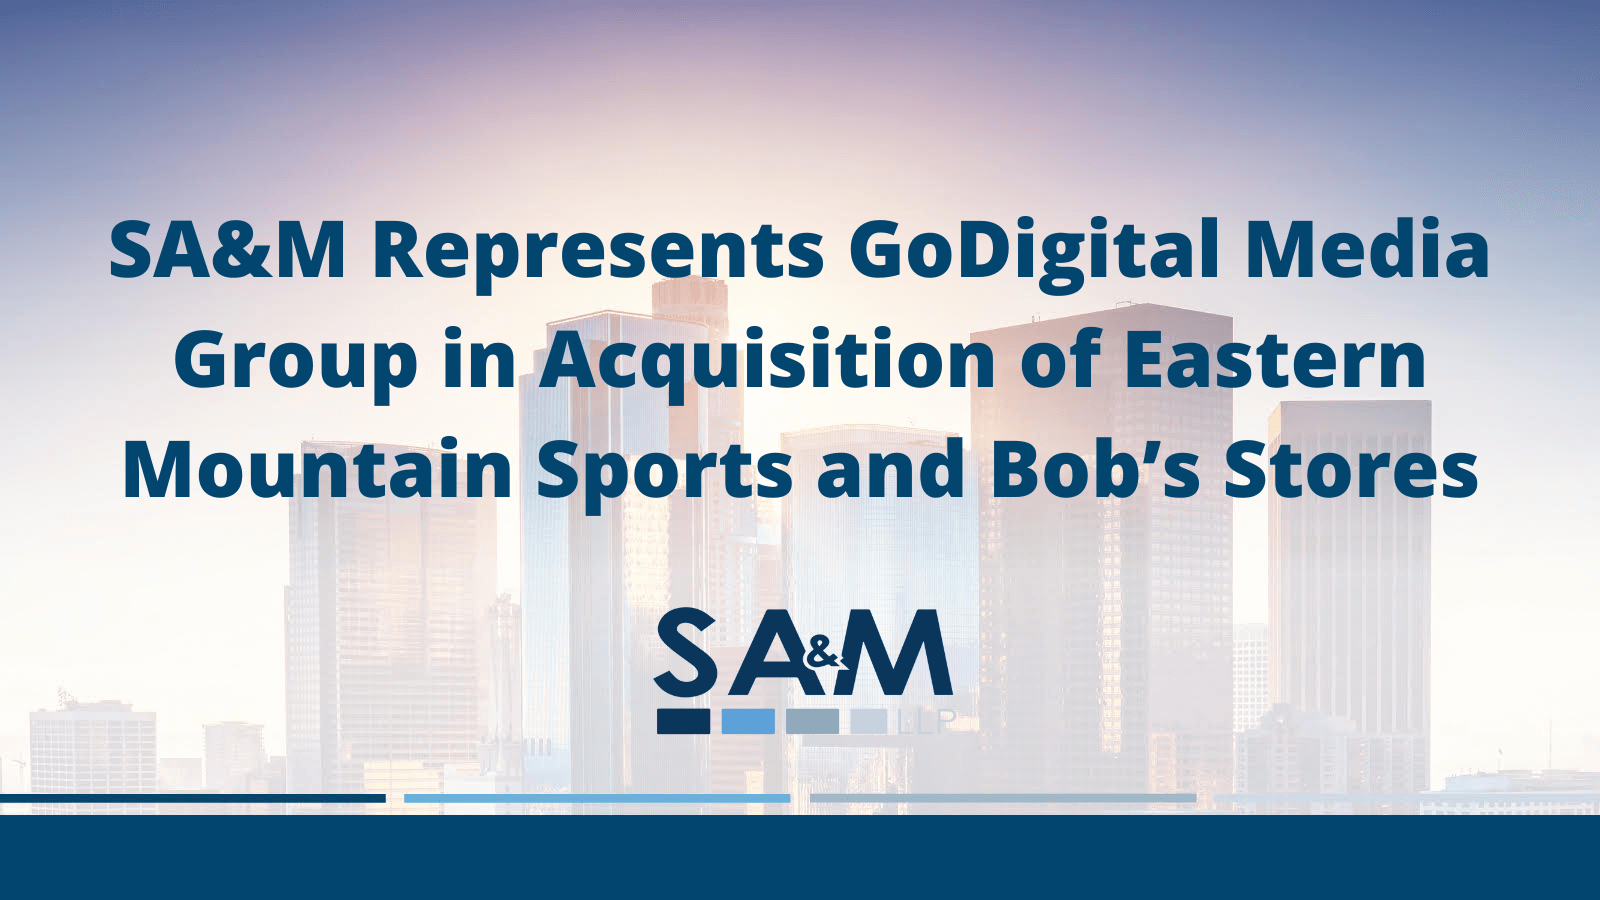 SA&M Represents GoDigital Media Group in Acquisition of Eastern Mountain Sports and Bob’s Stores